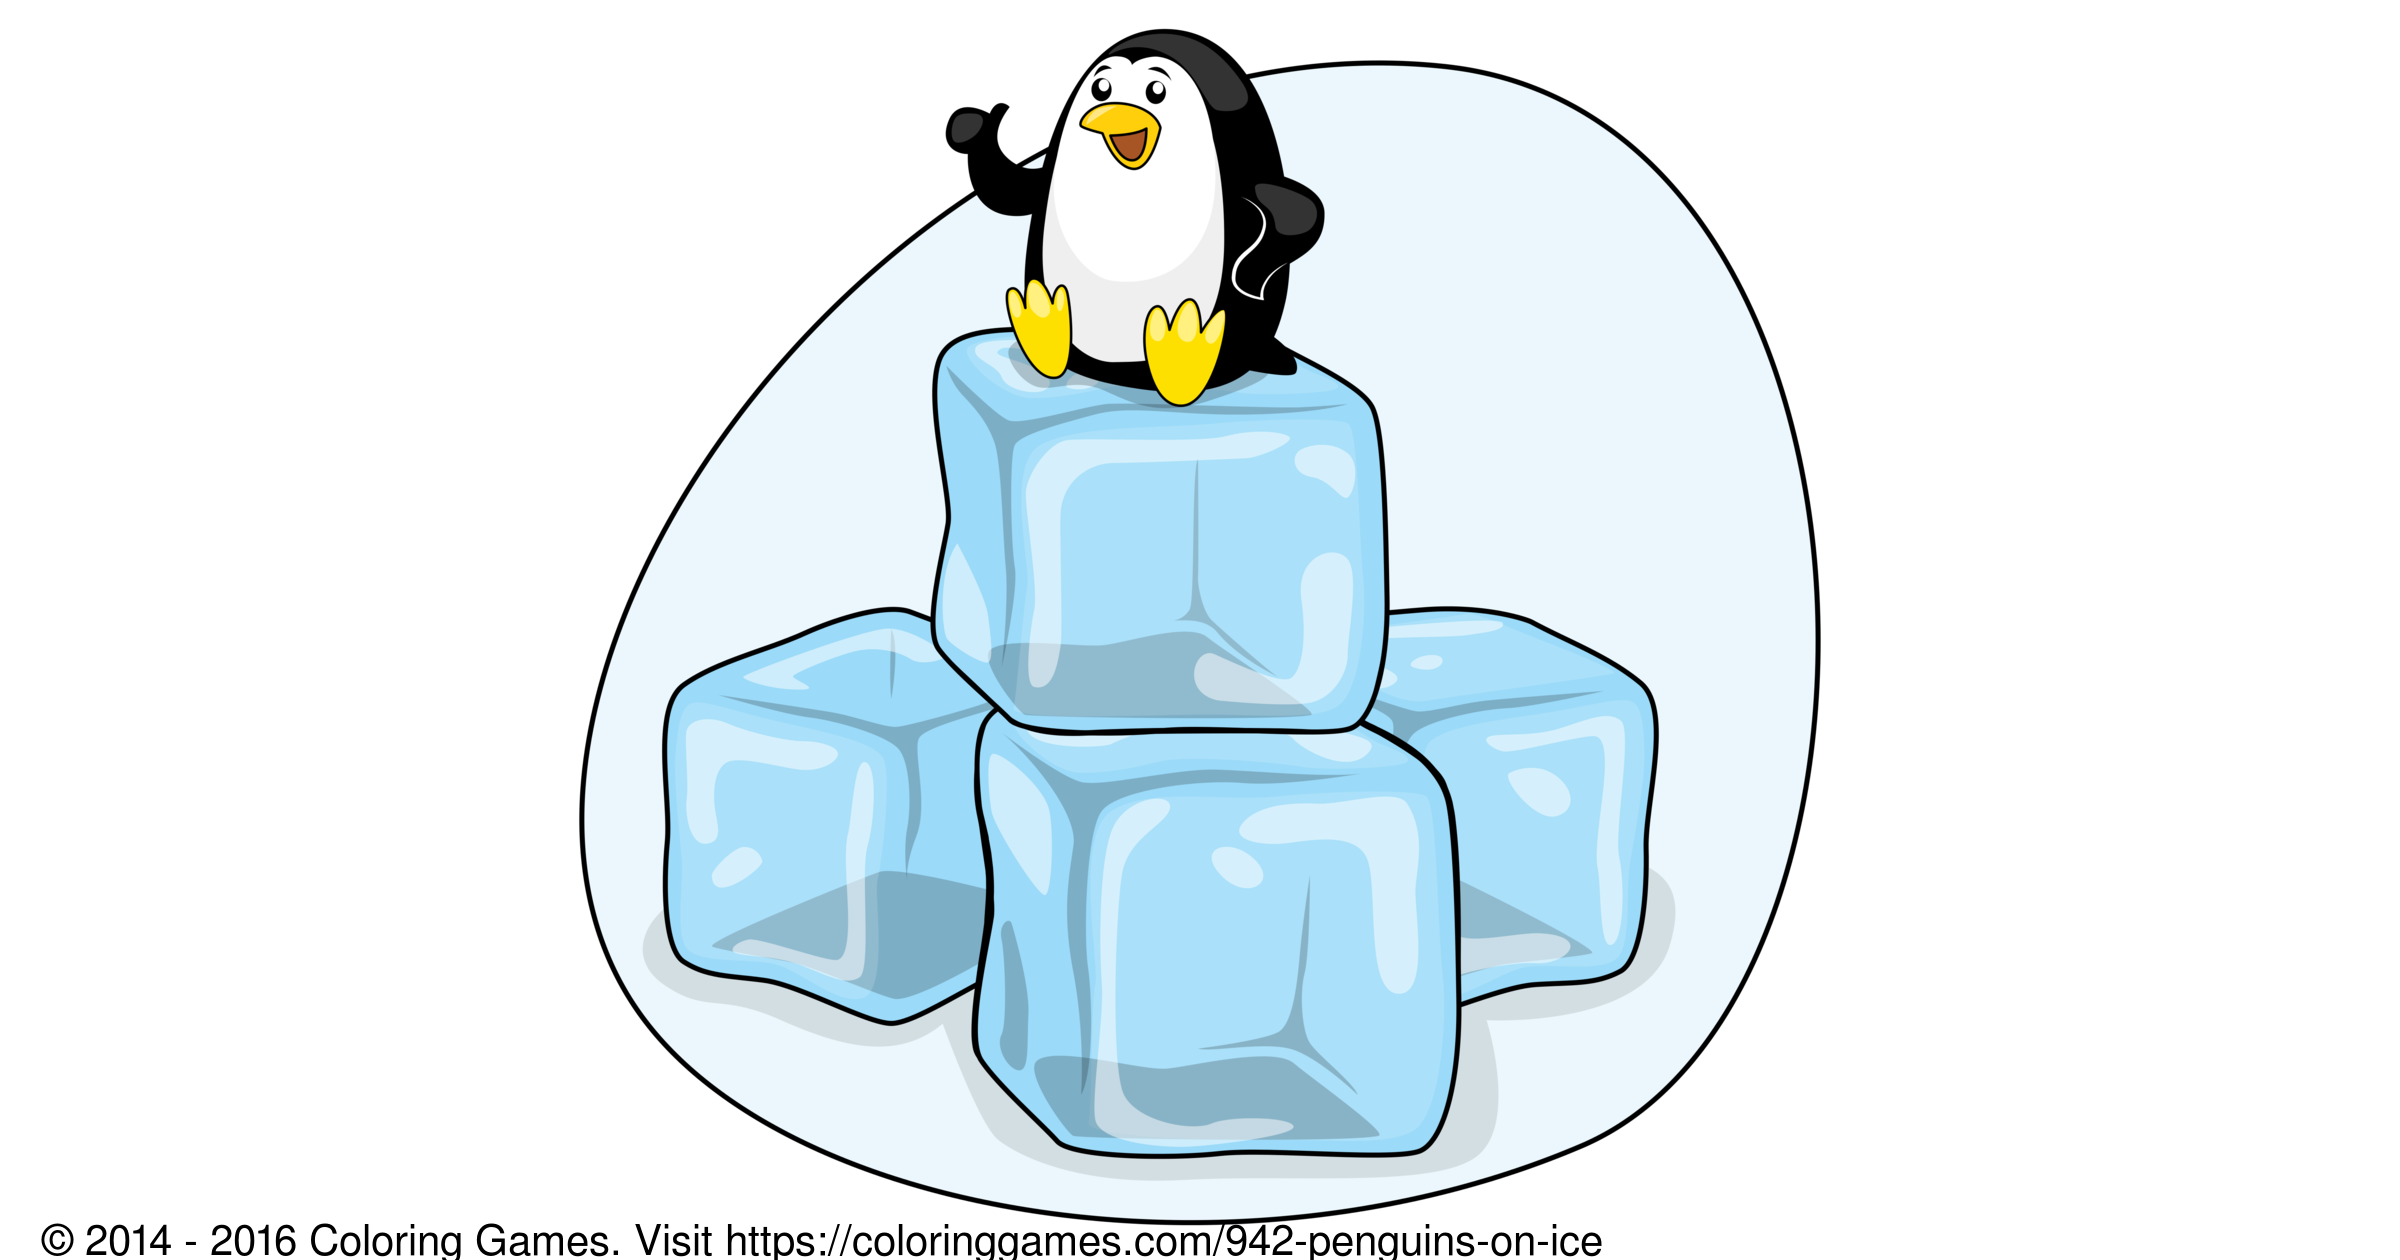 Penguins On Ice - Coloring Games and Coloring Pages